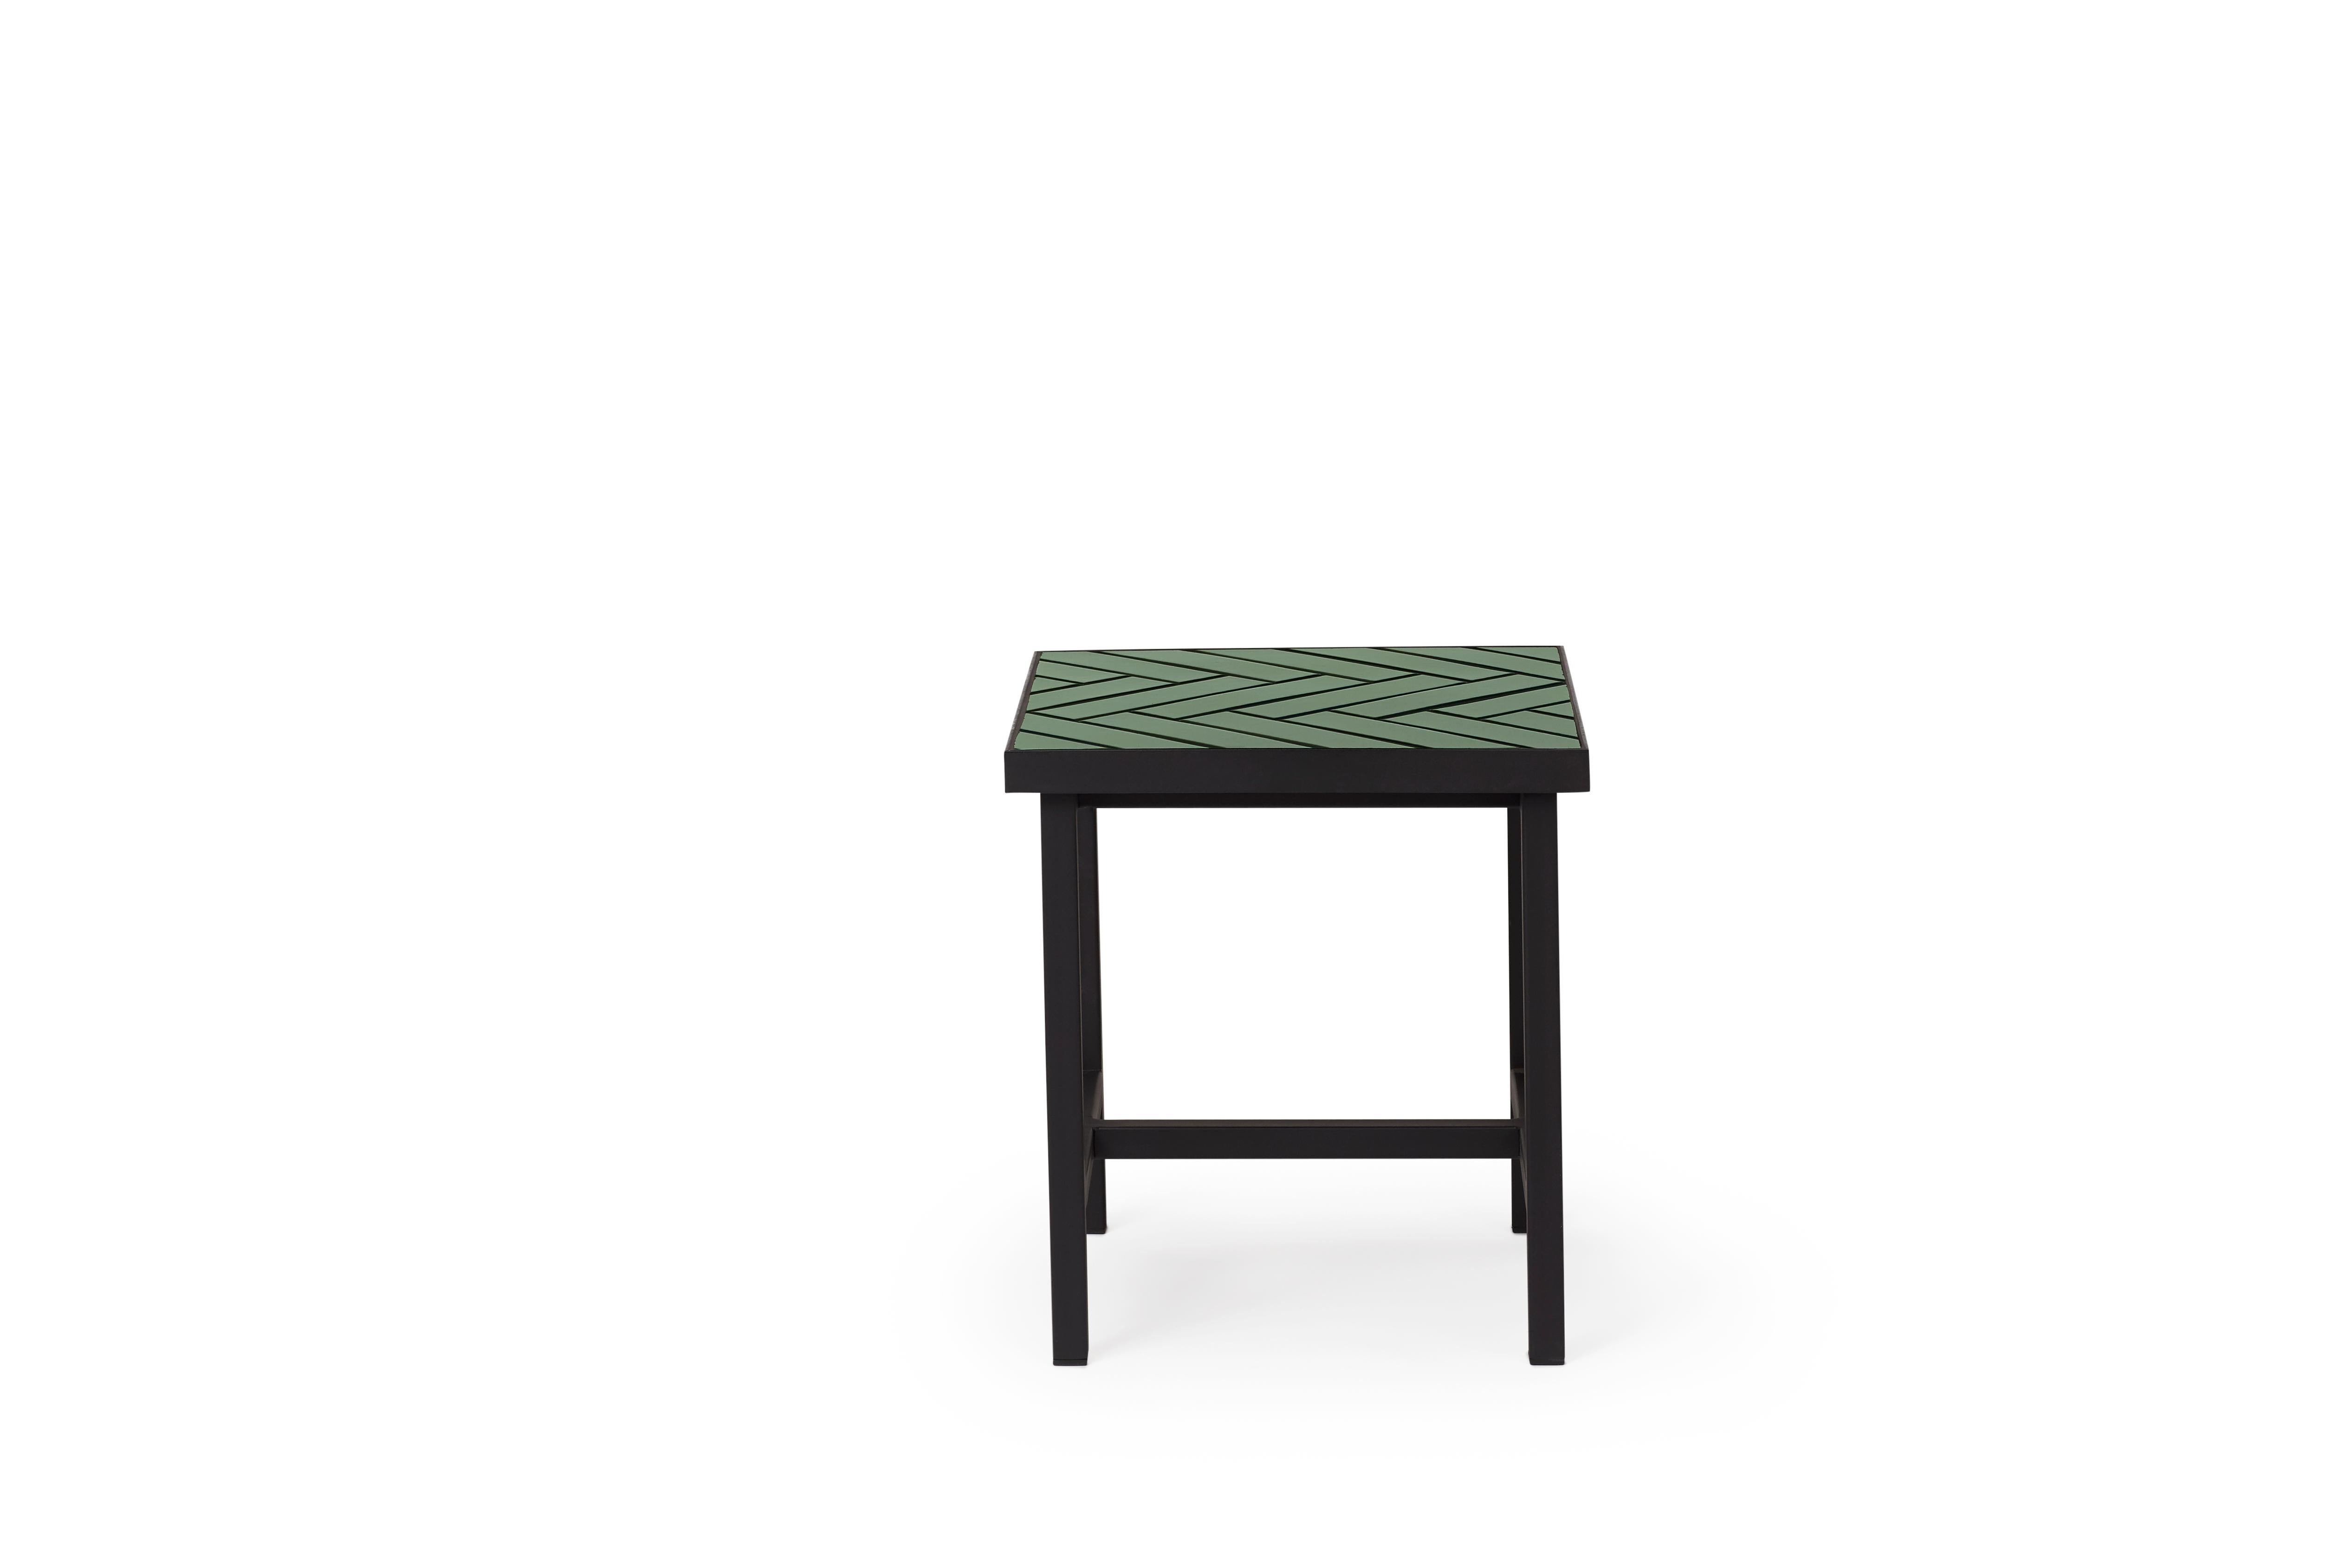 For Sale: Green (Forest green) Herringbone Side Table, by Charlotte Høncke from Warm Nordic